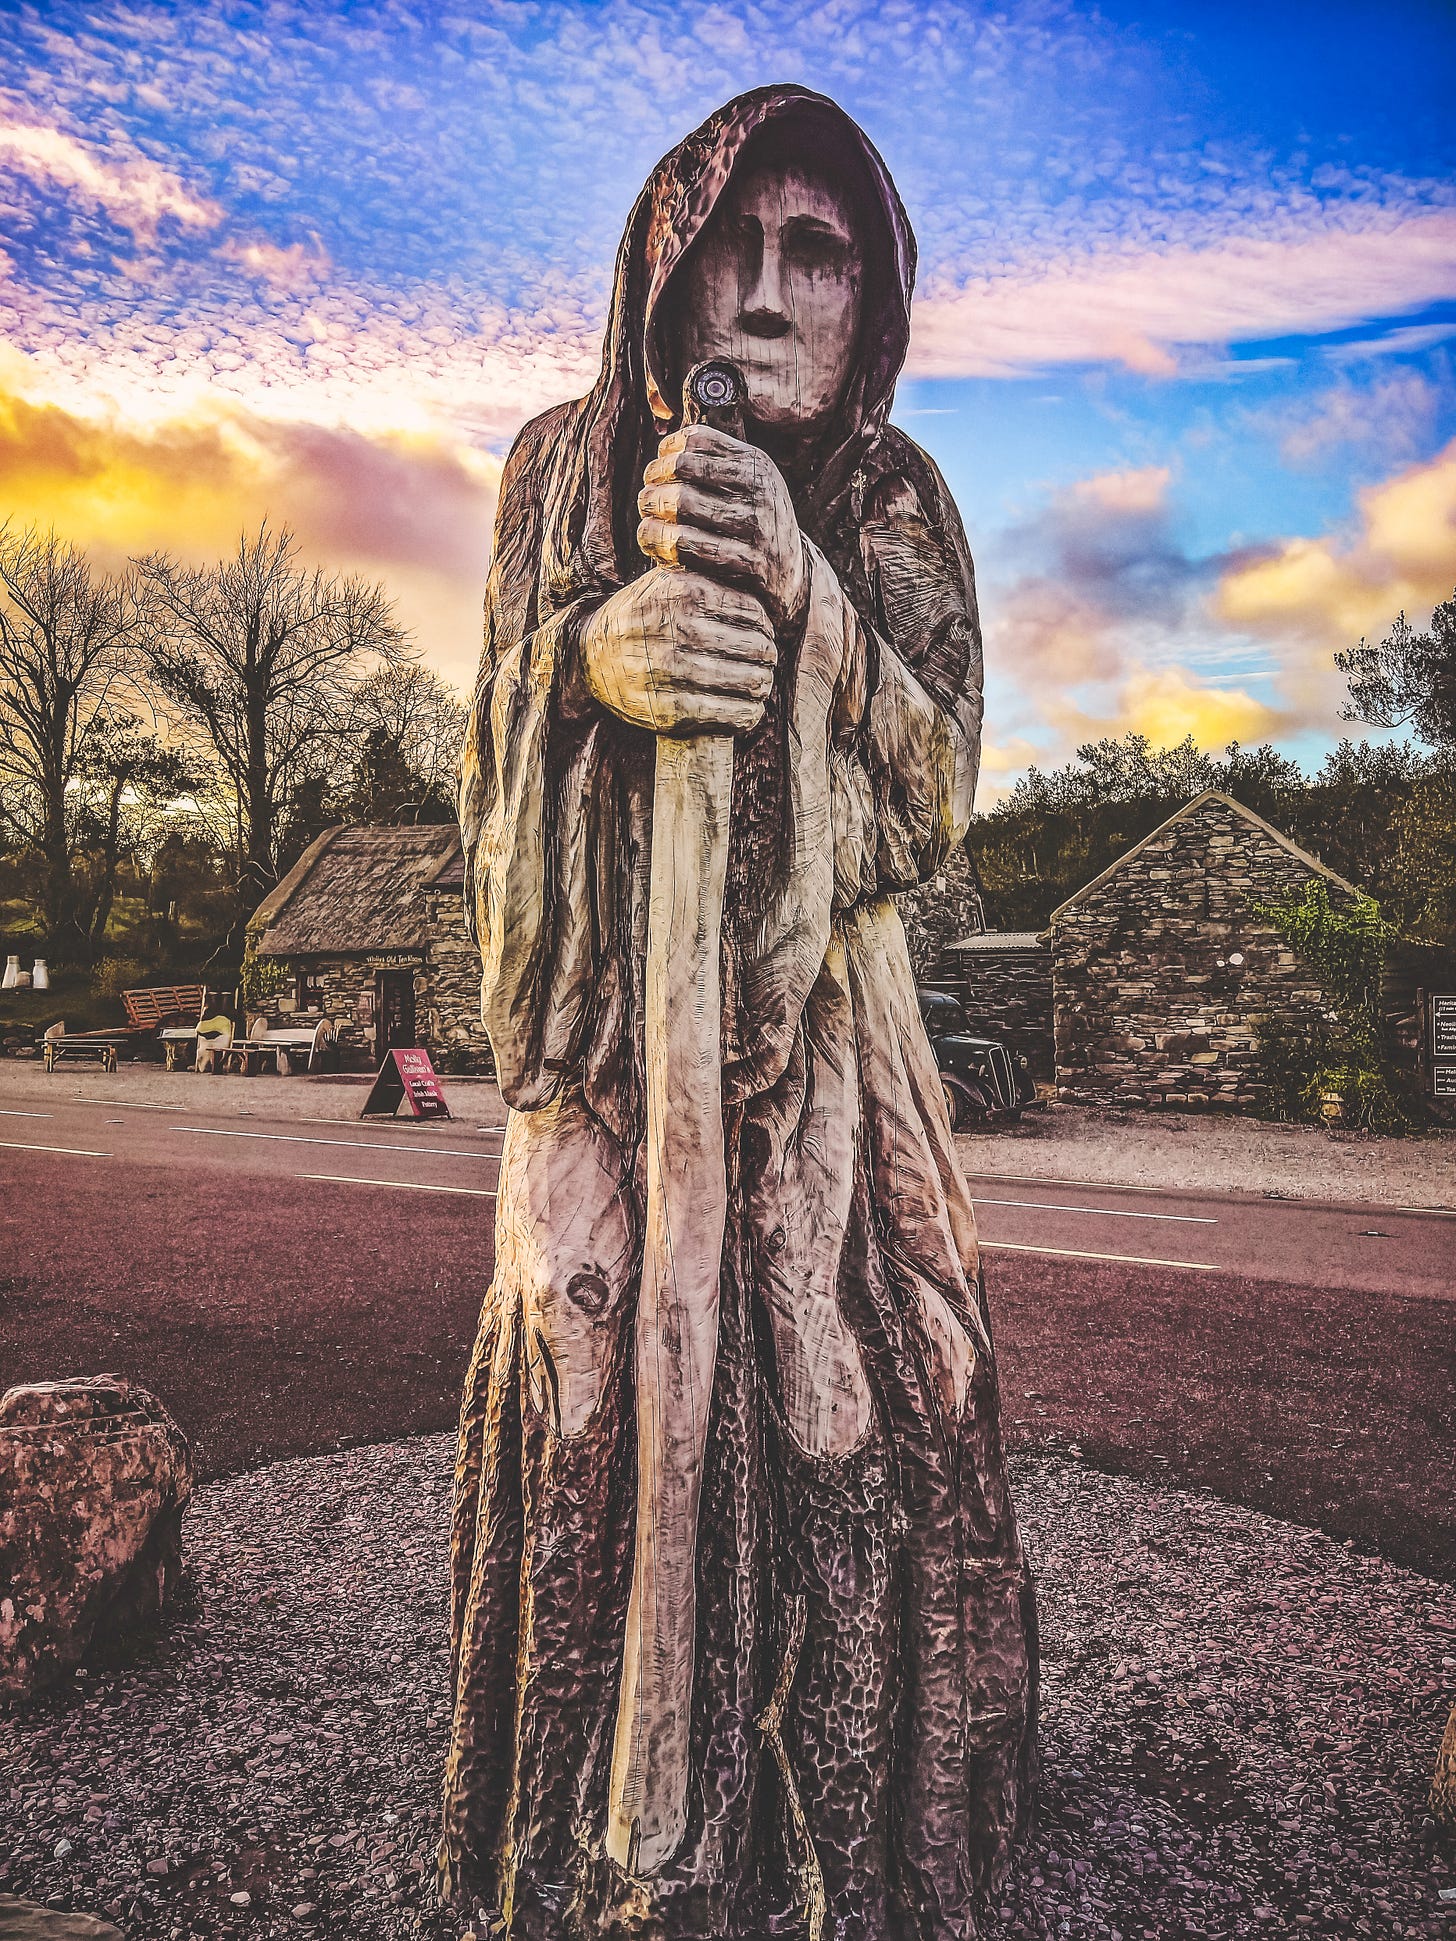 Statue of a crone against a blue and yellow clouded sky in a village with stone houses along a paved road.